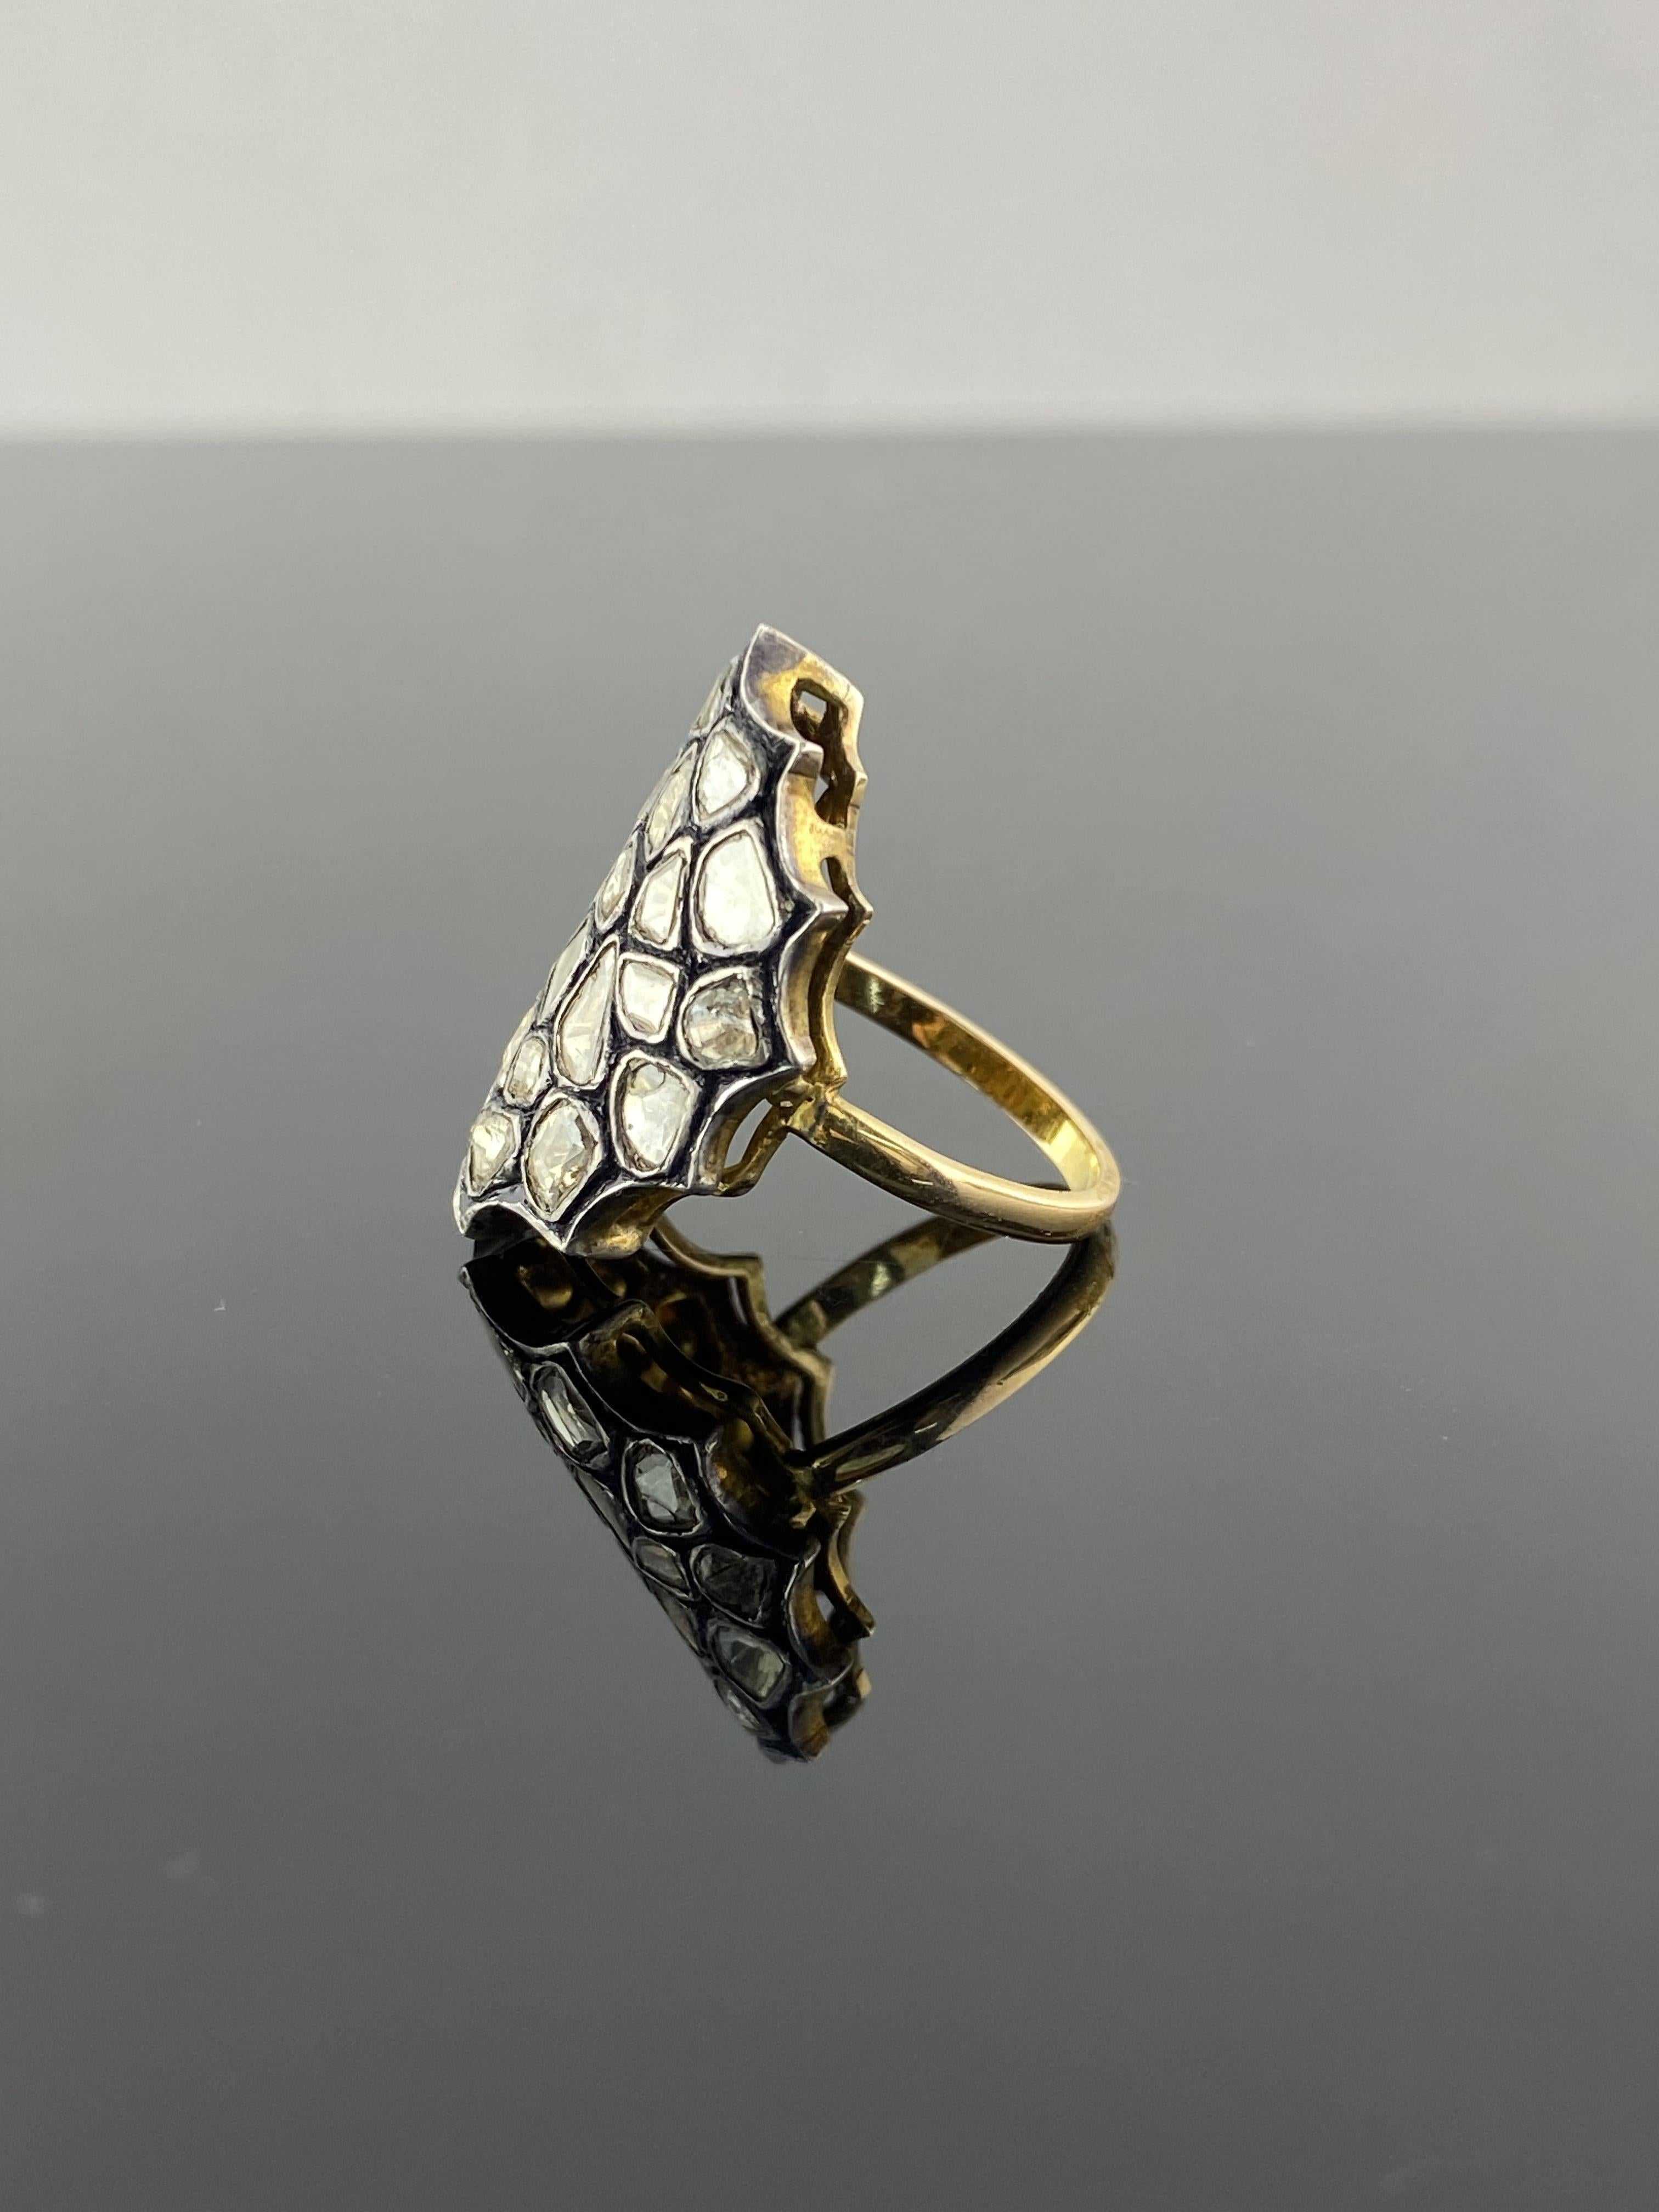 A beautiful, antique looking, 1.5 carat total rose-cut Diamond ring, set in silver and plated in yellow gold and black rhodium. The ring is currently sized at US 7, can be resized.
Feel free to message for more information!